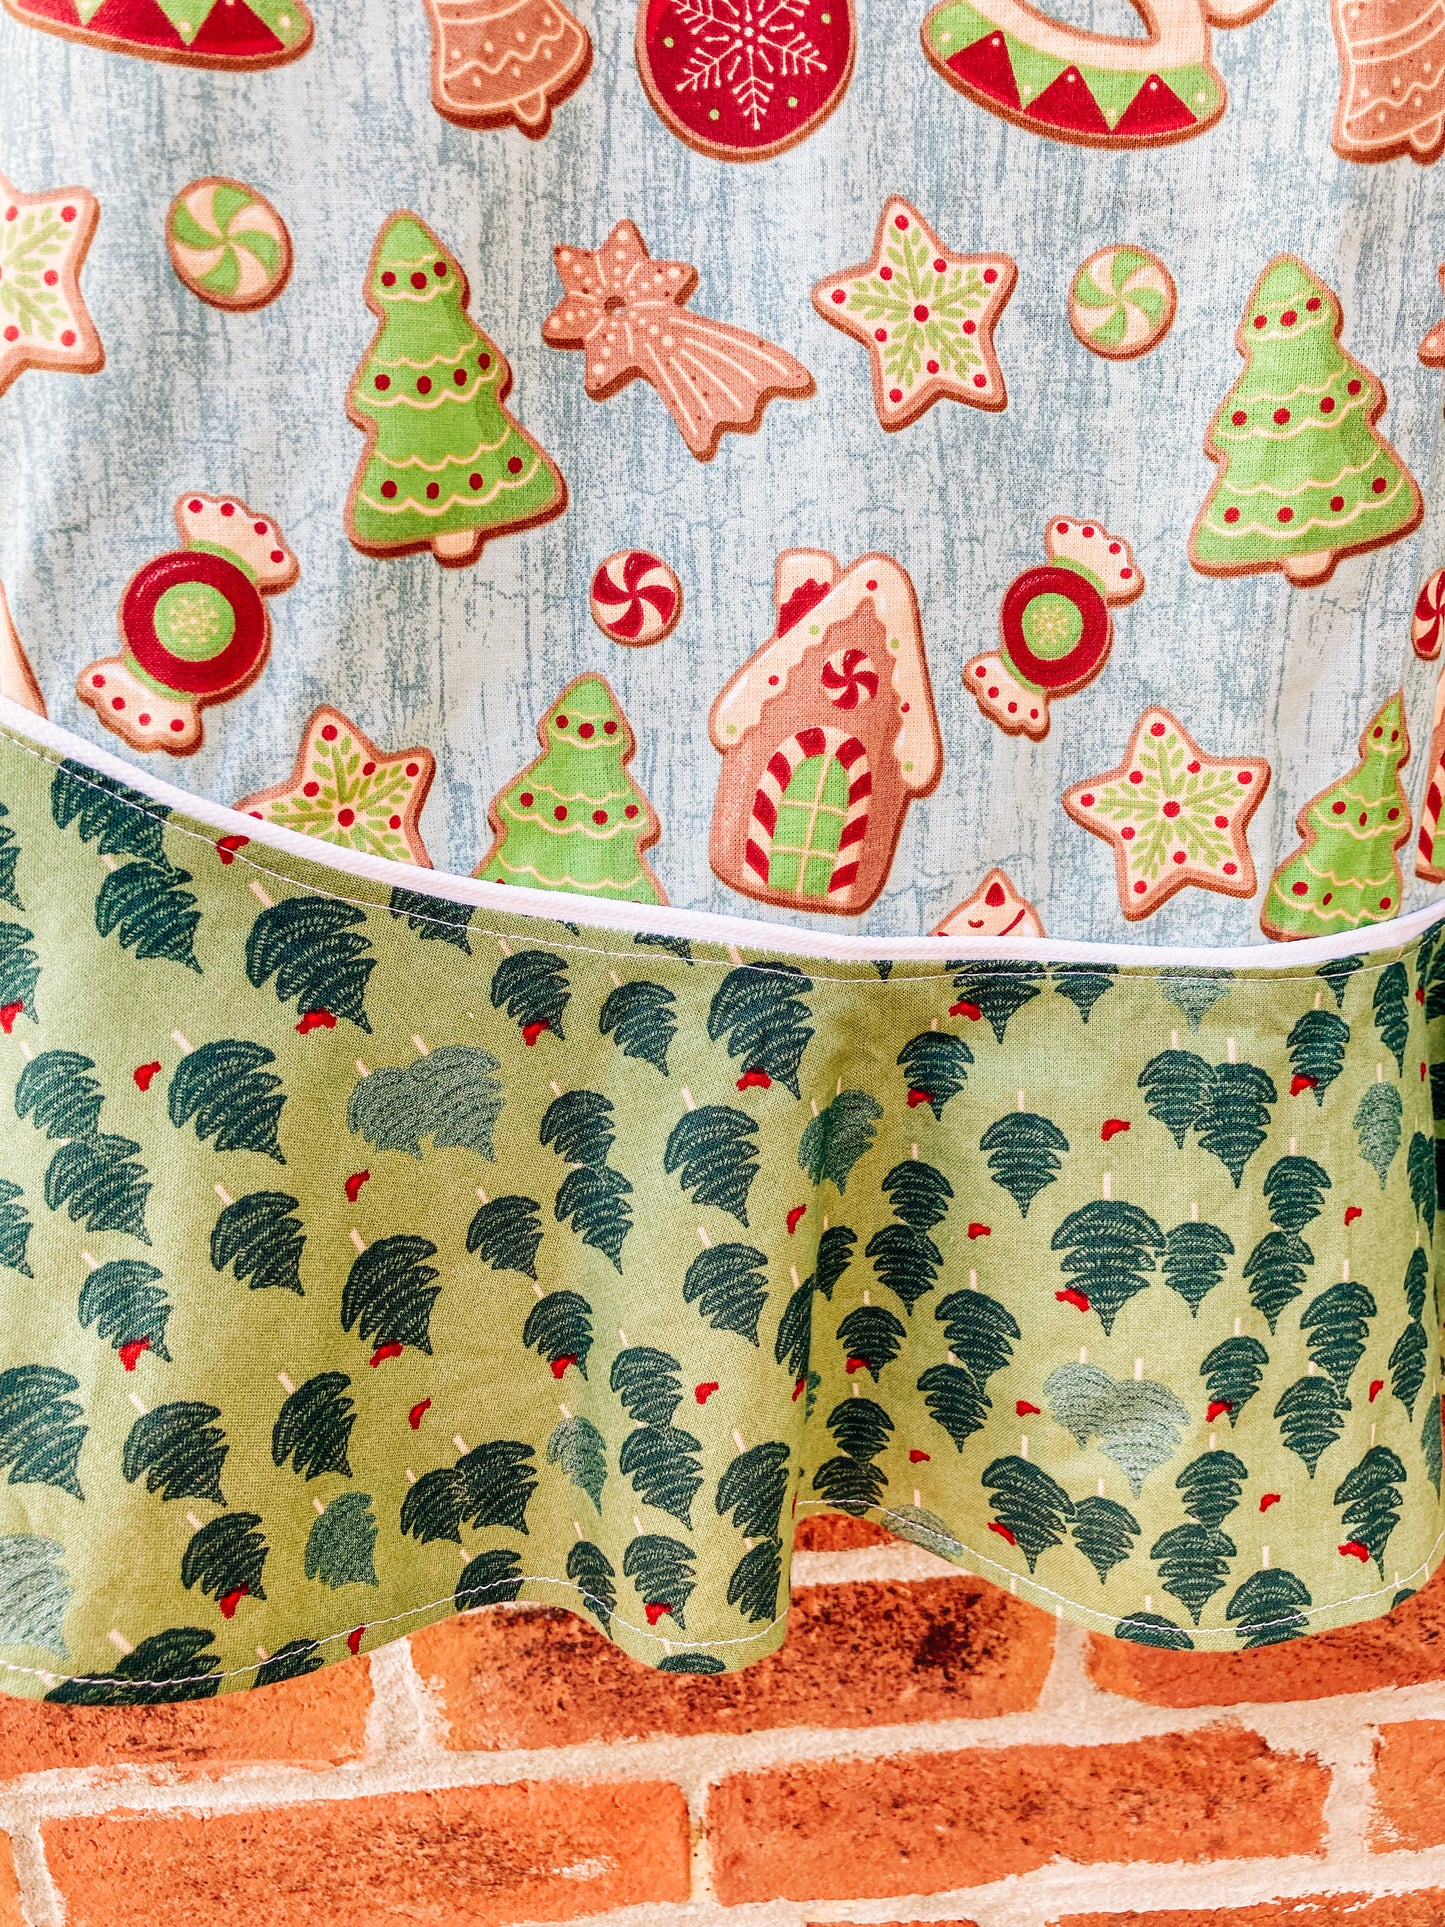 Christmas Cookies Pattern Apron - Adult Size (38" Long) by Patti R. Schroeder